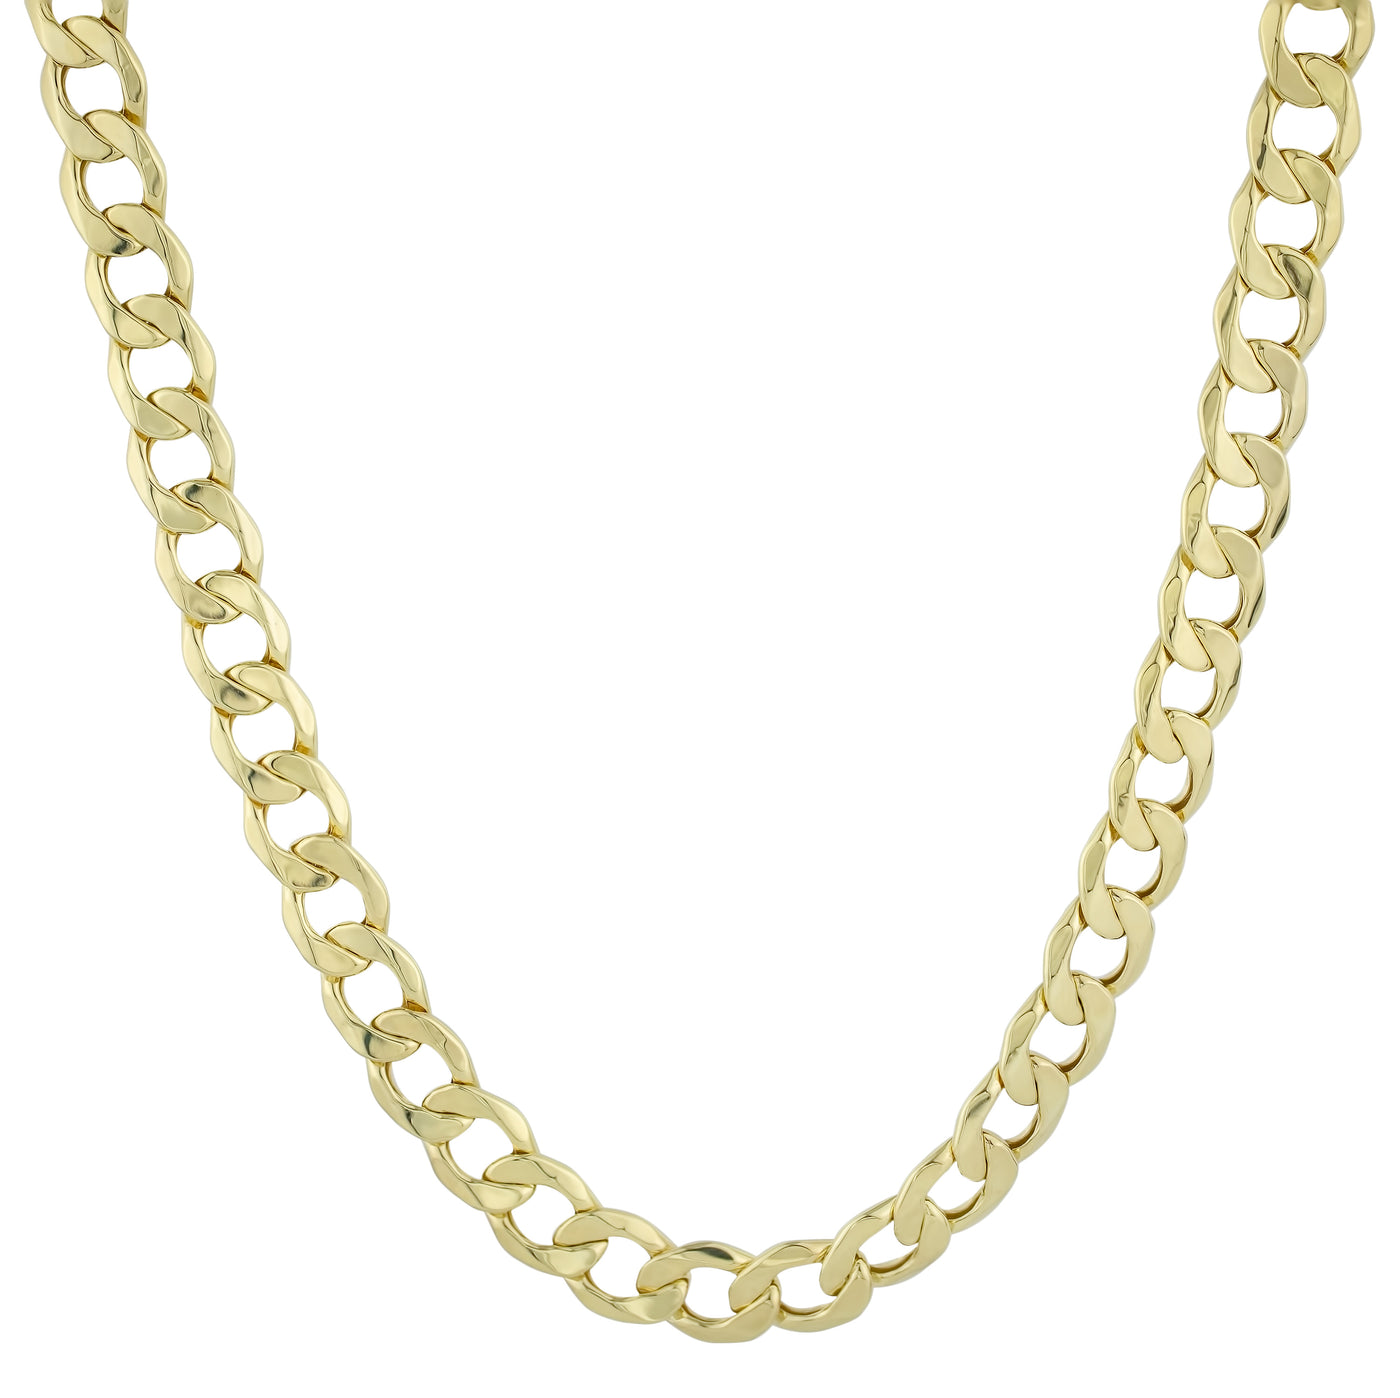 Women's Miami Curb Chain 10K Yellow Gold - Hollow